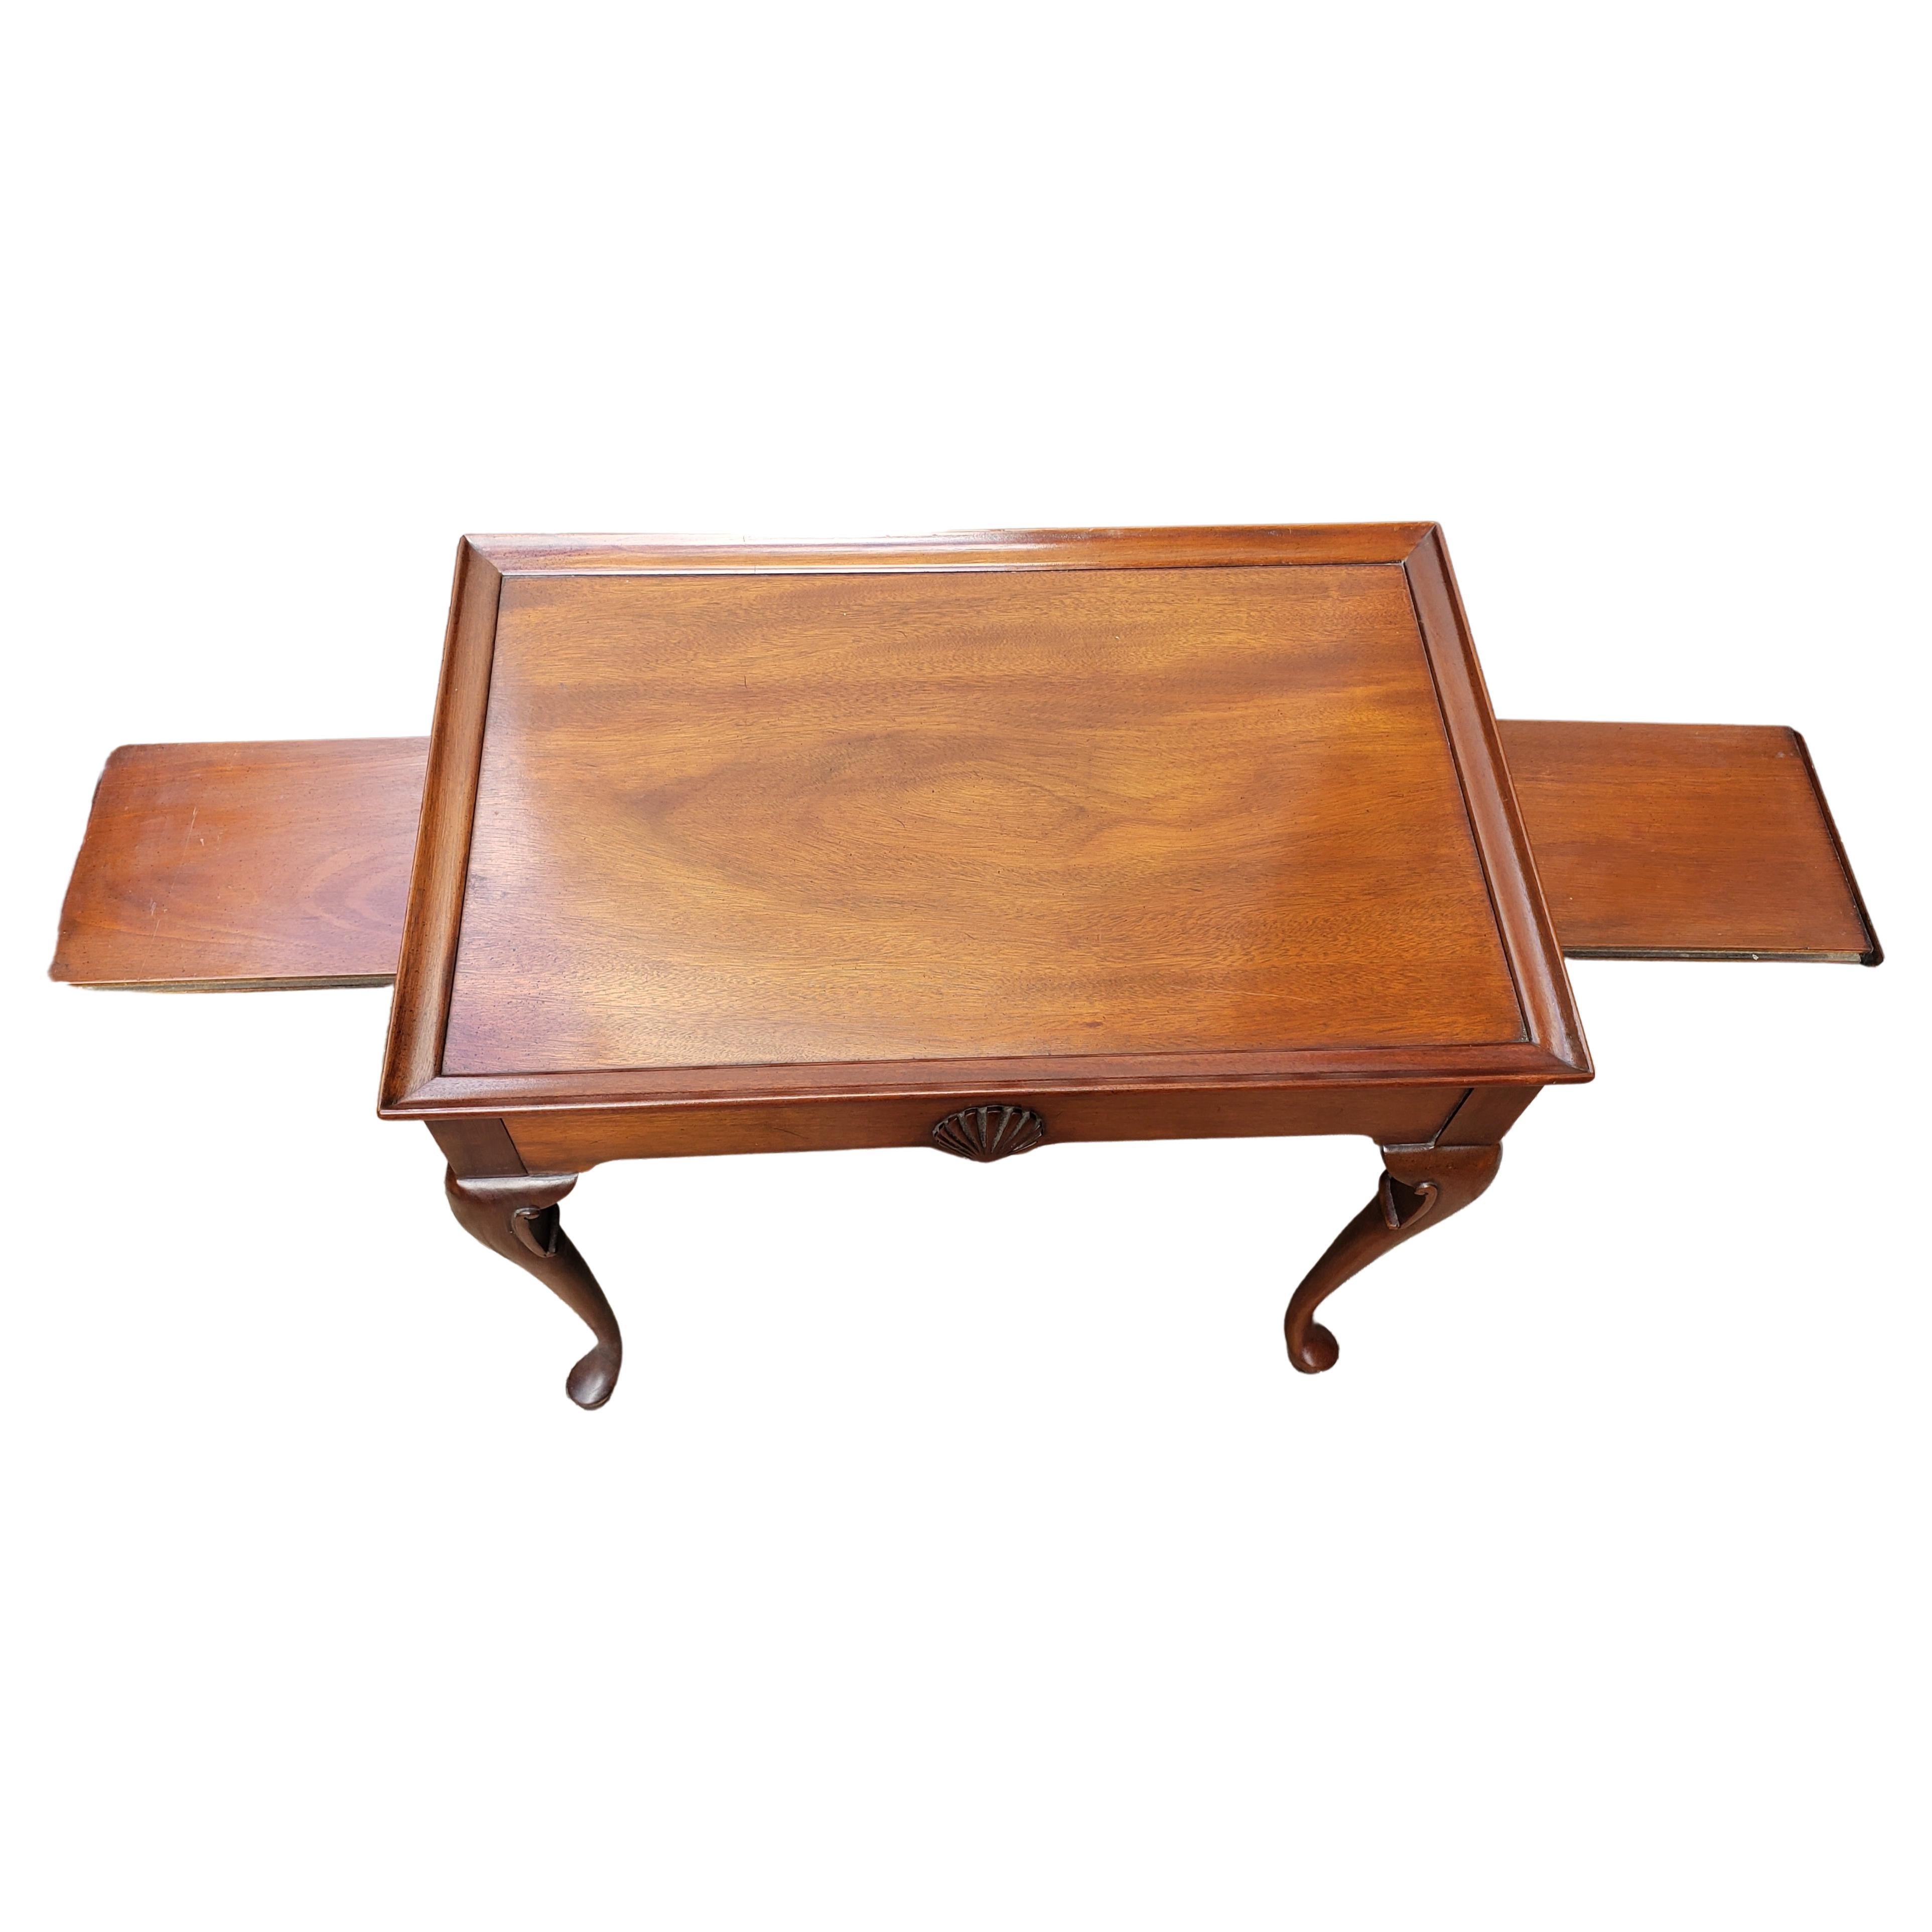 American 1950s English Mahogany Queen Anne Tray Top Tea Table by Hickory Chair Co. For Sale